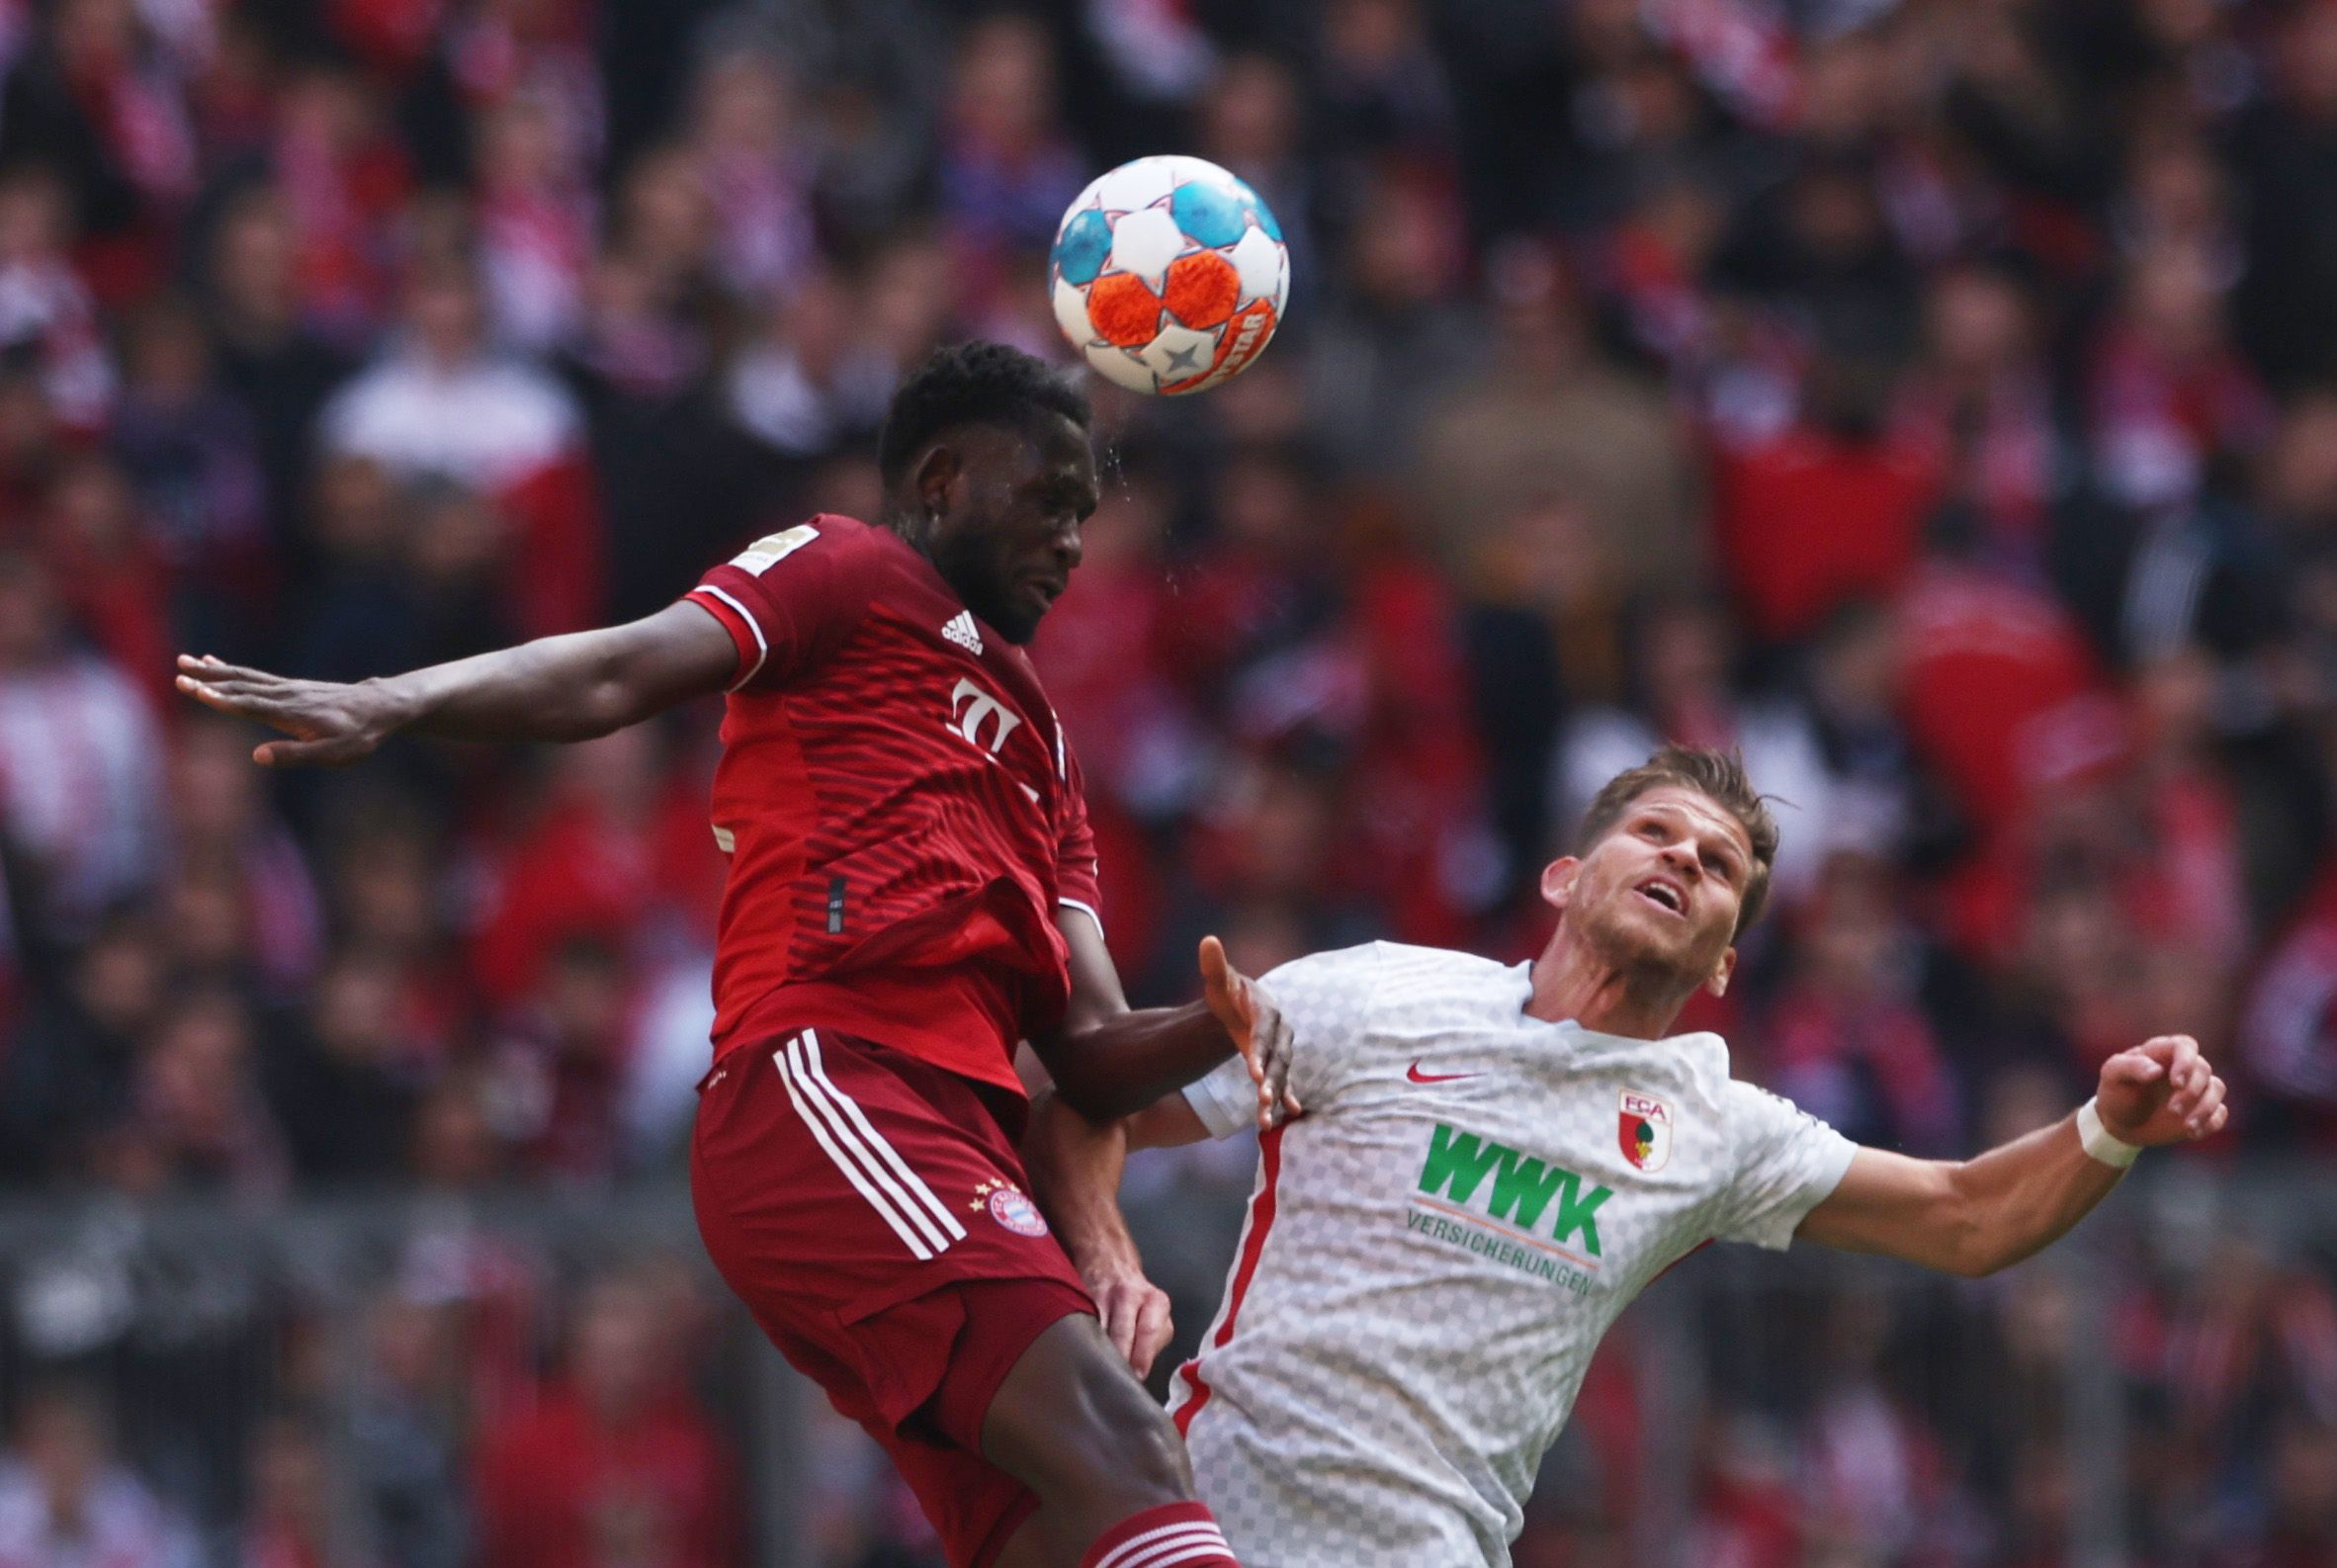 Soccer Football - Bundesliga - Bayern Munich v FC Augsburg - Allianz Arena, Munich, Germany - April 9, 2022 Bayern Munich's Omar Richards in action with FC Augsburg's Florian Niederlechner REUTERS/Lukas Barth DFL REGULATIONS PROHIBIT ANY USE OF PHOTOGRAPHS AS IMAGE SEQUENCES AND/OR QUASI-VIDEO.